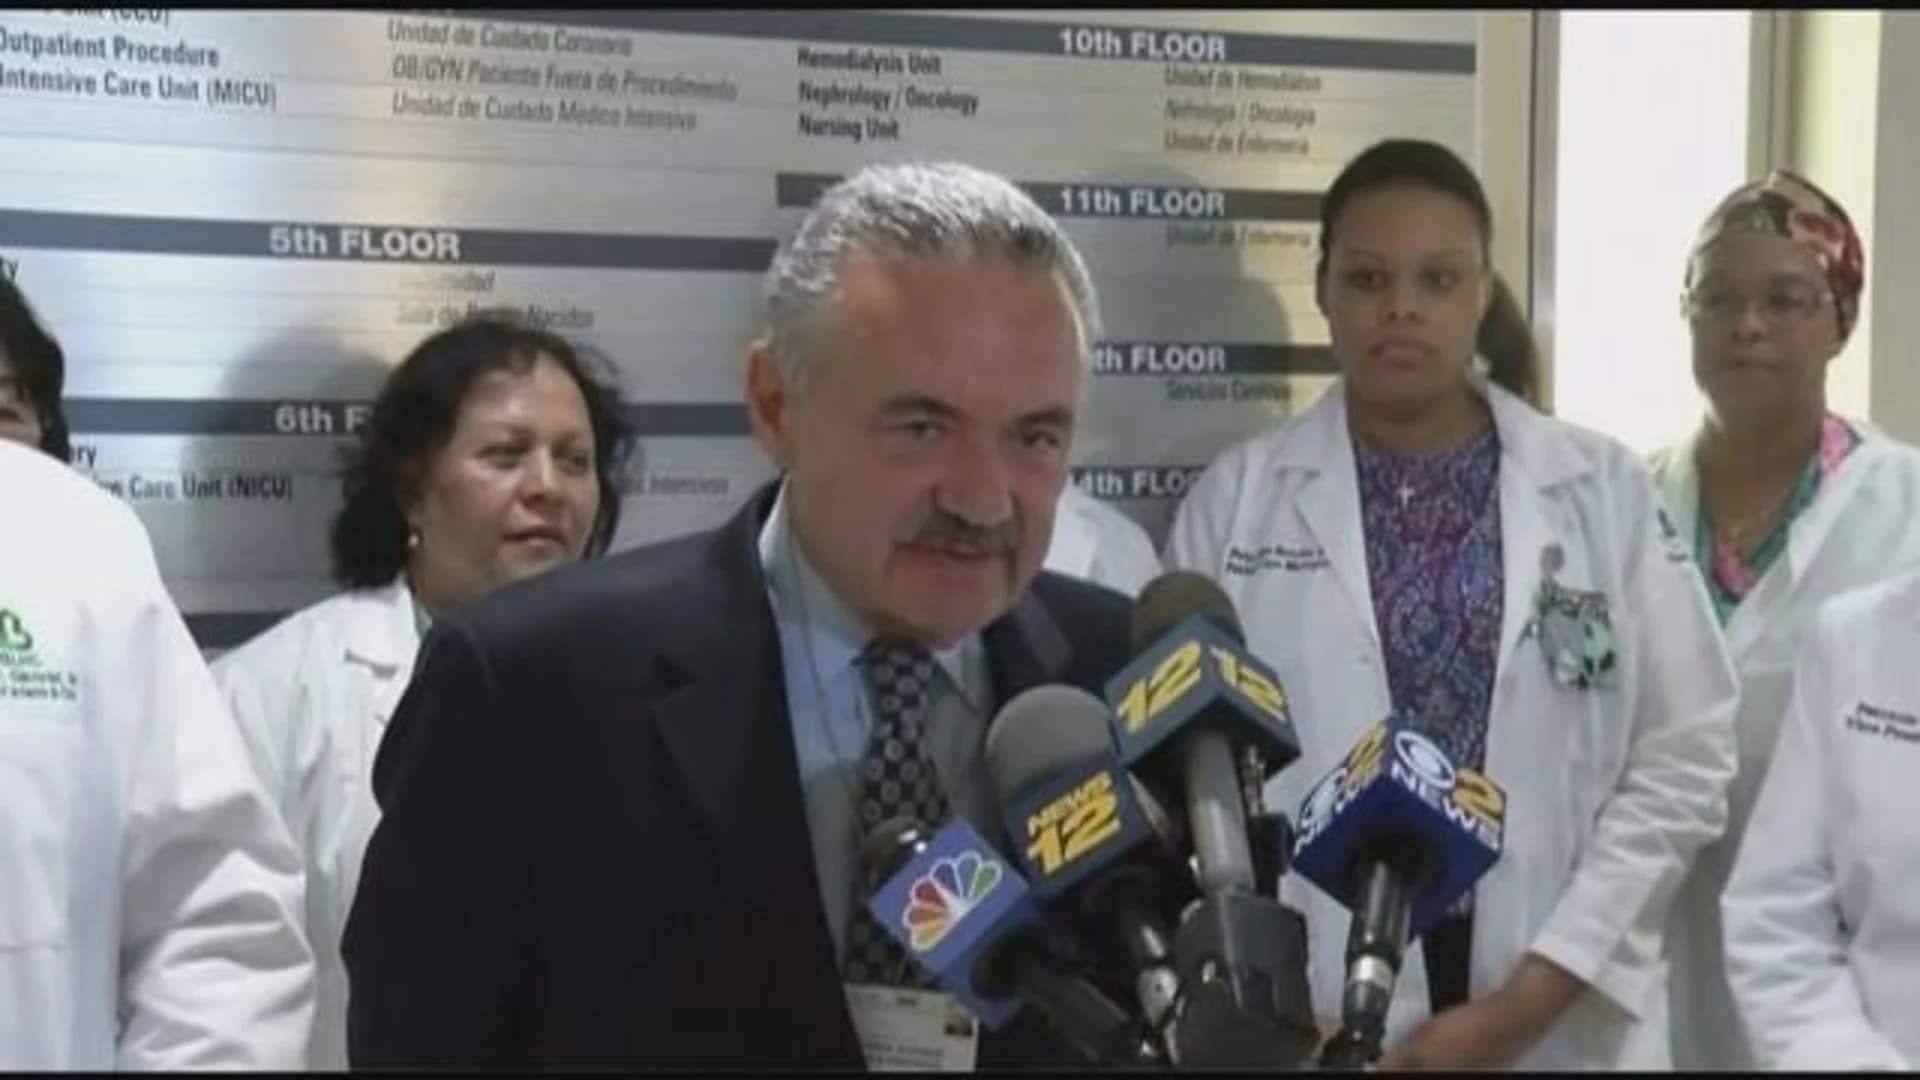 Officials: Hospital staffers acted heroically during shooting